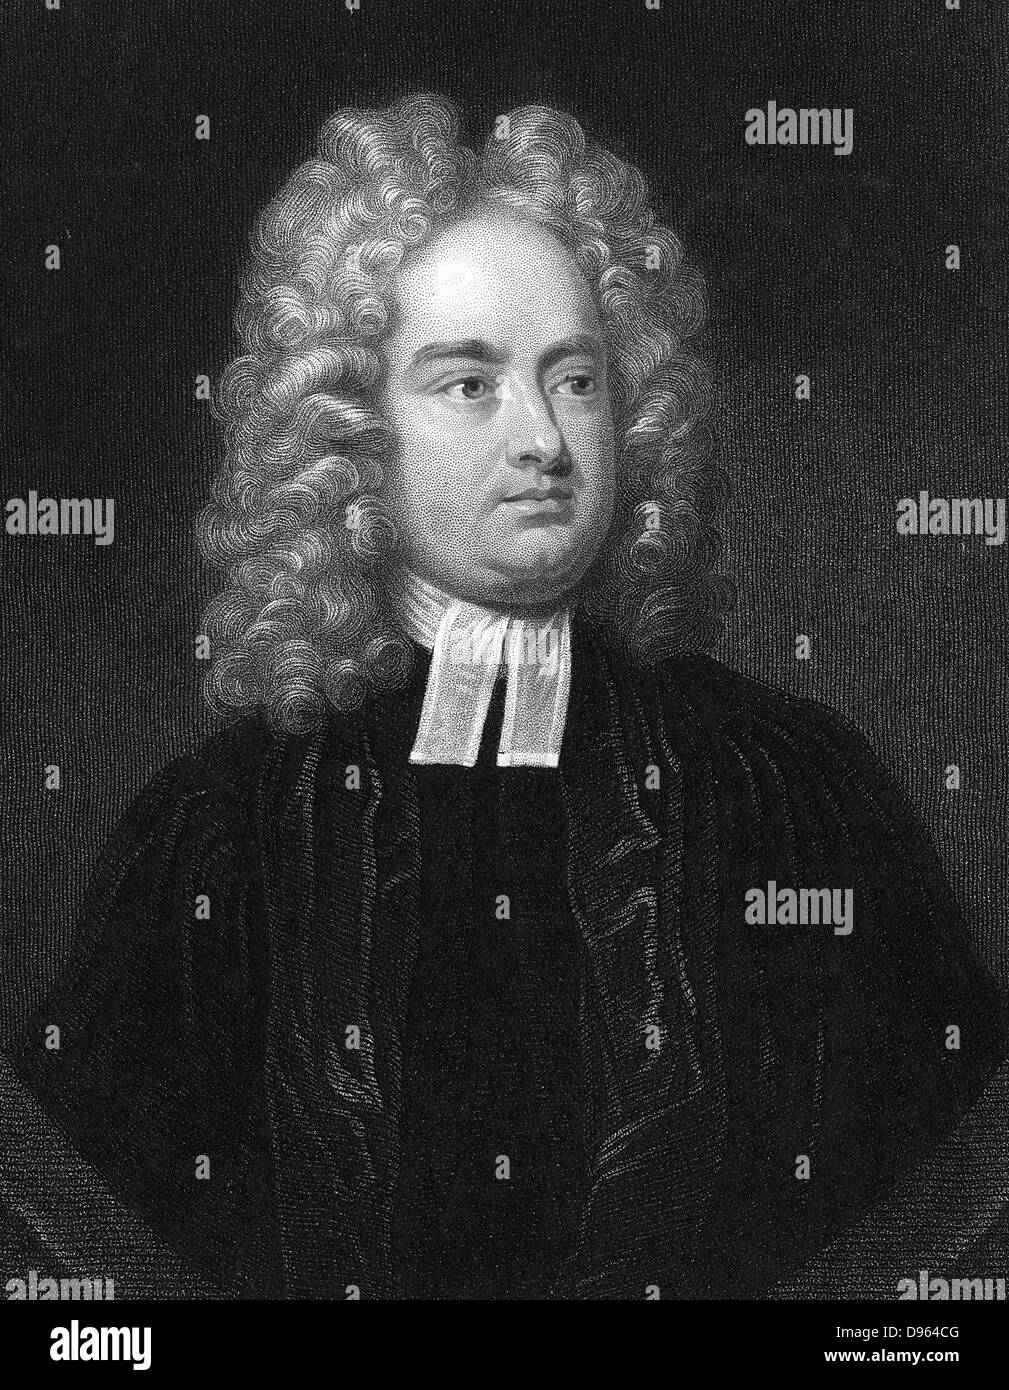 Jonathan Swift (1667-1746)  Anglo-Irish clergyman, satirist and poet.  Author of  'Gulliver's Travels' 1726 'Battle of the Books' and 'A Tale of the Tub' 1704. Engraving Stock Photo